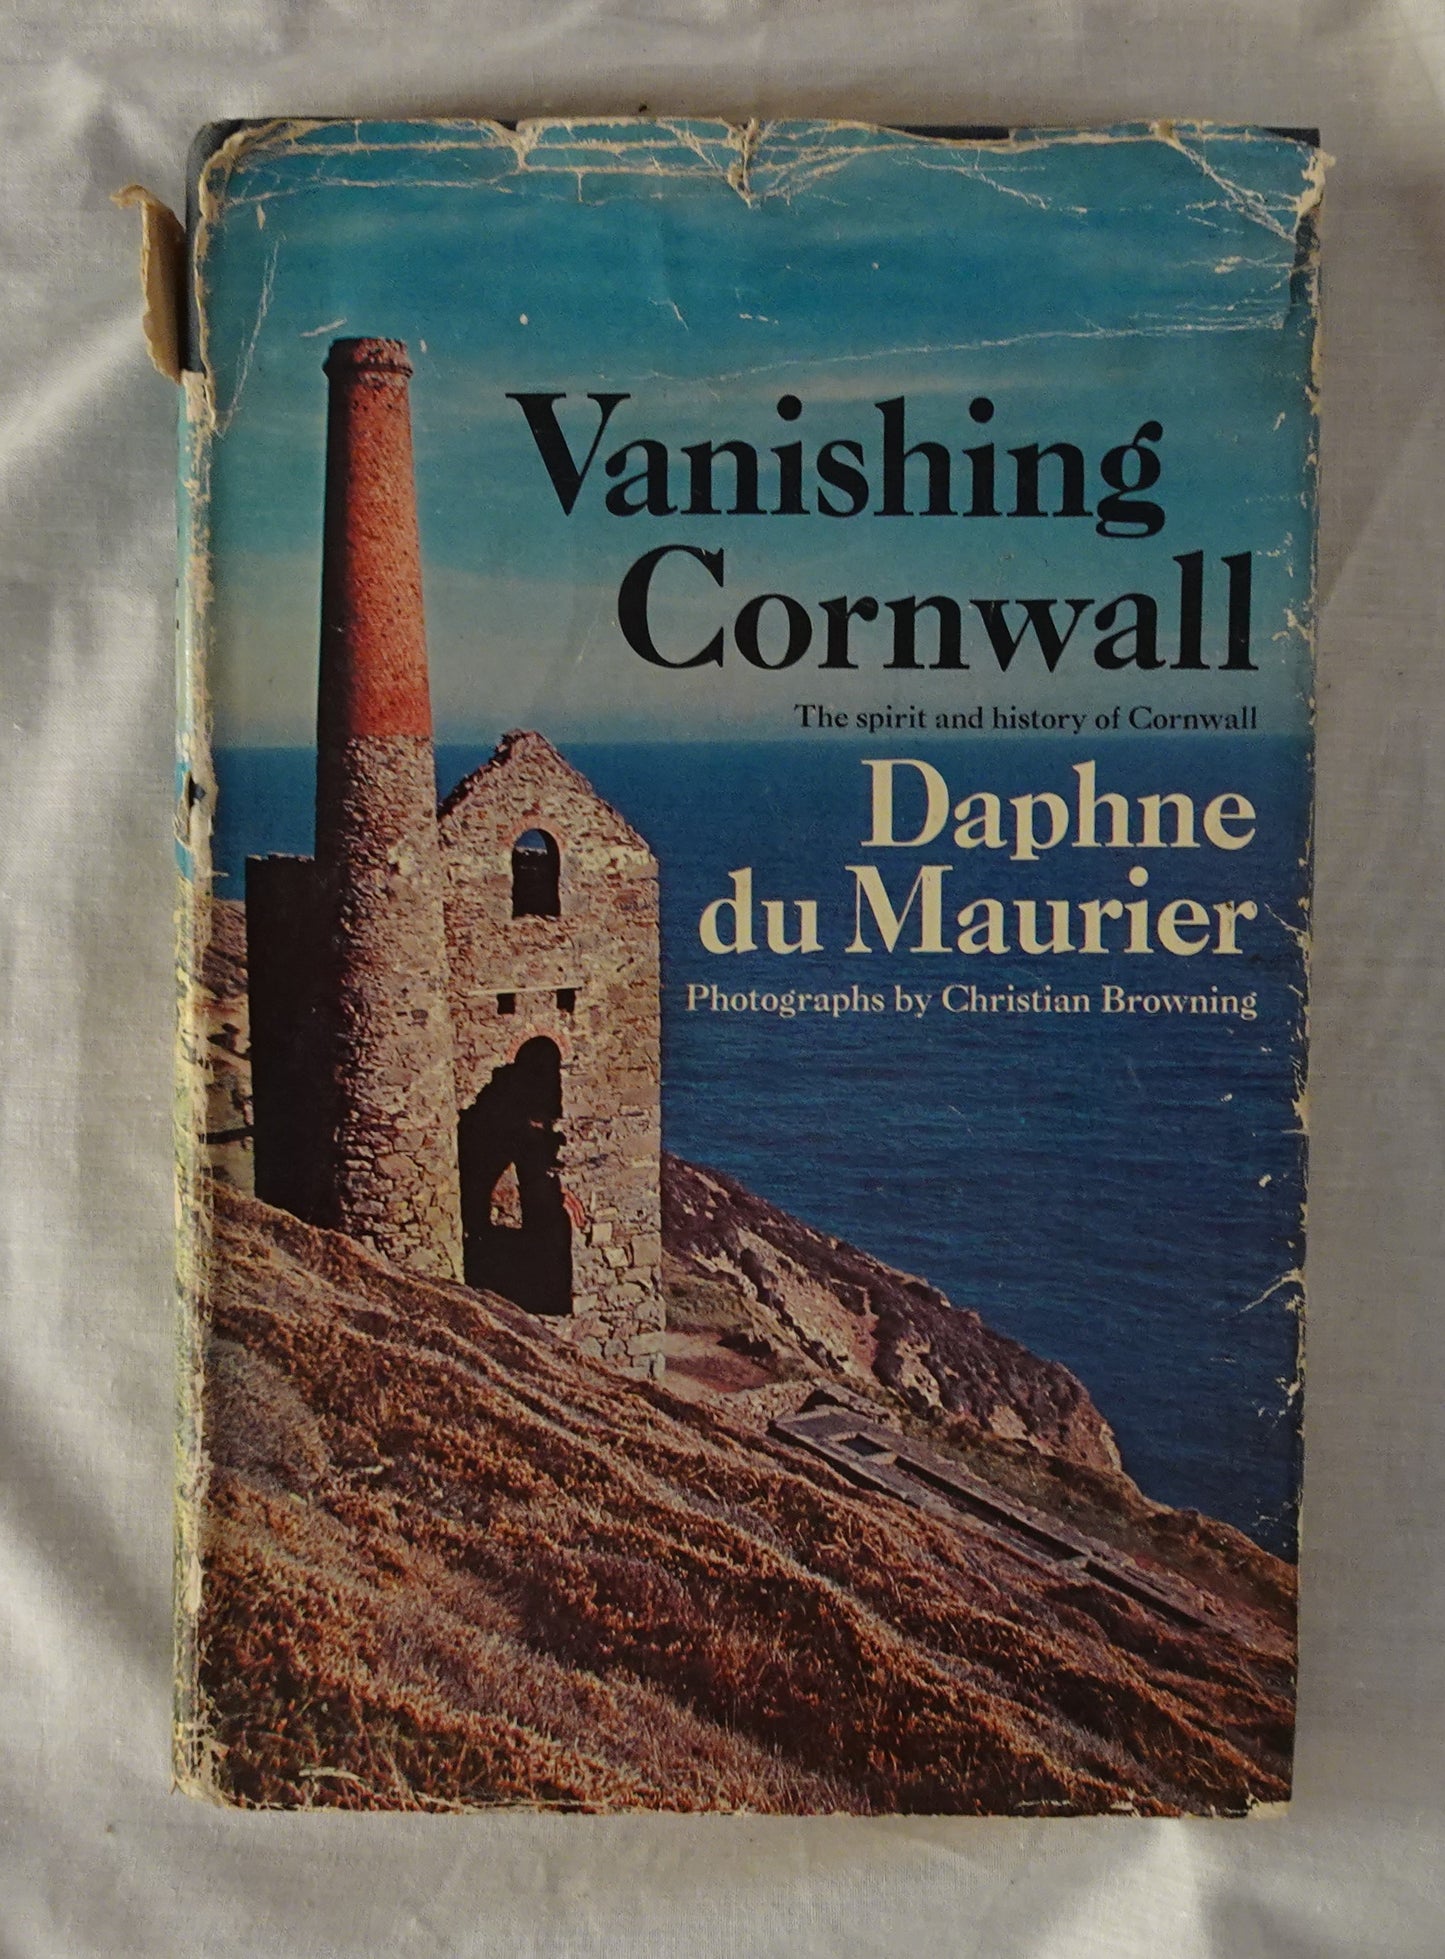 Vanishing Cornwall  The Spirit and History of Cornwall  by Daphne du Maurier  Photographs by Christian Browning